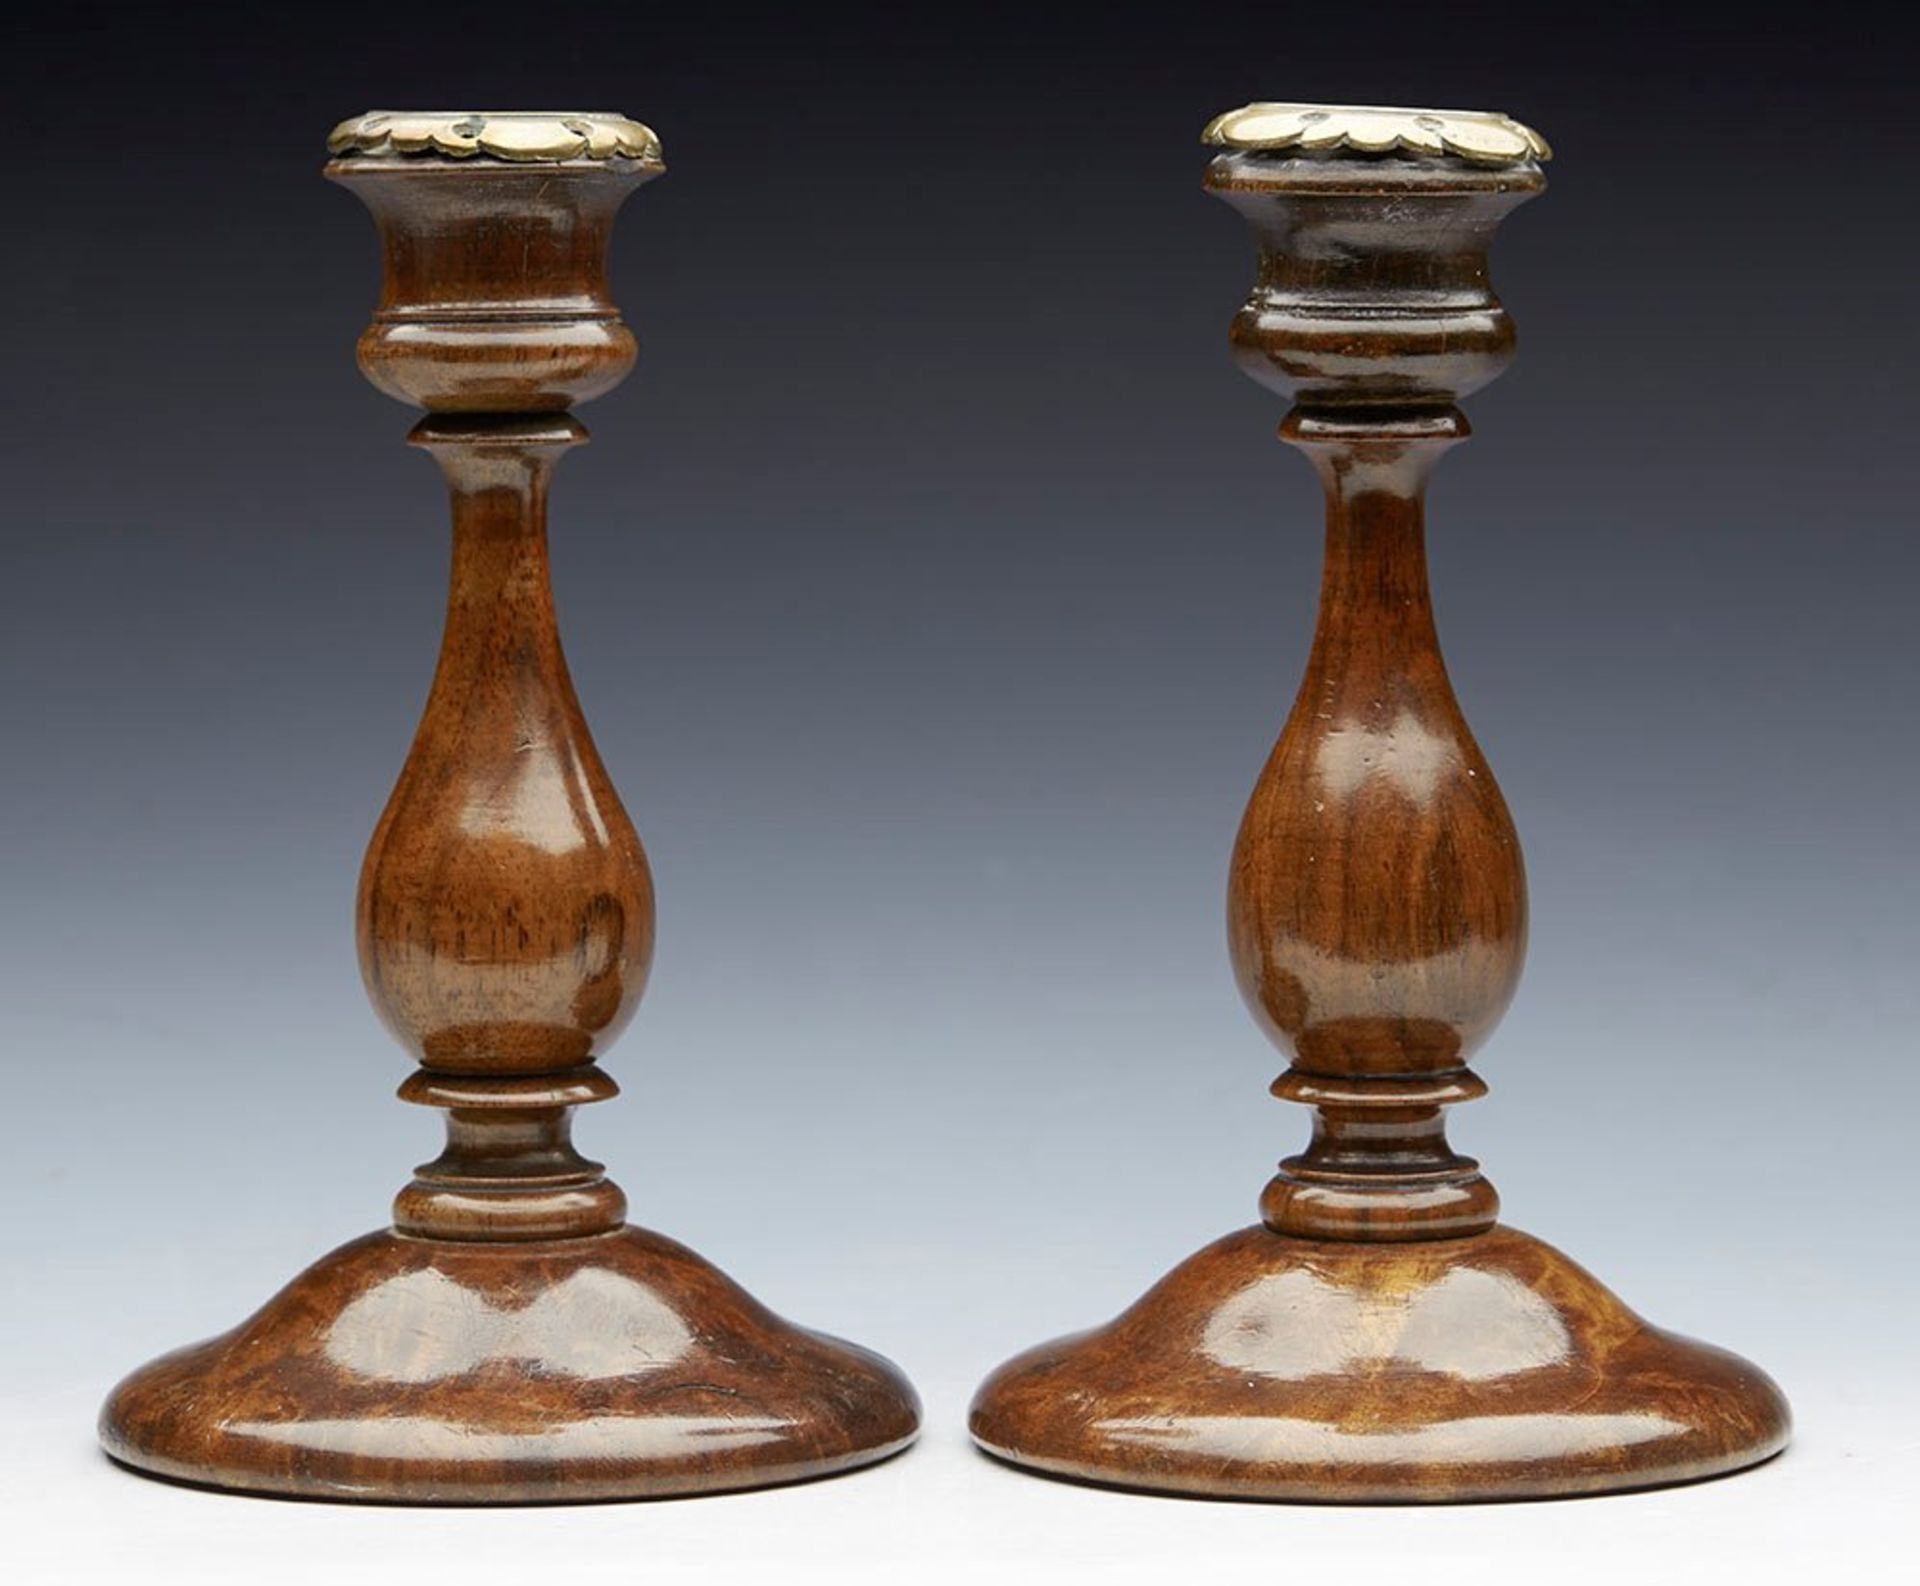 ANTIQUE BRASS MOUNTED TURNED WOOD PEDESTAL CANDLESTICKS 19TH C.